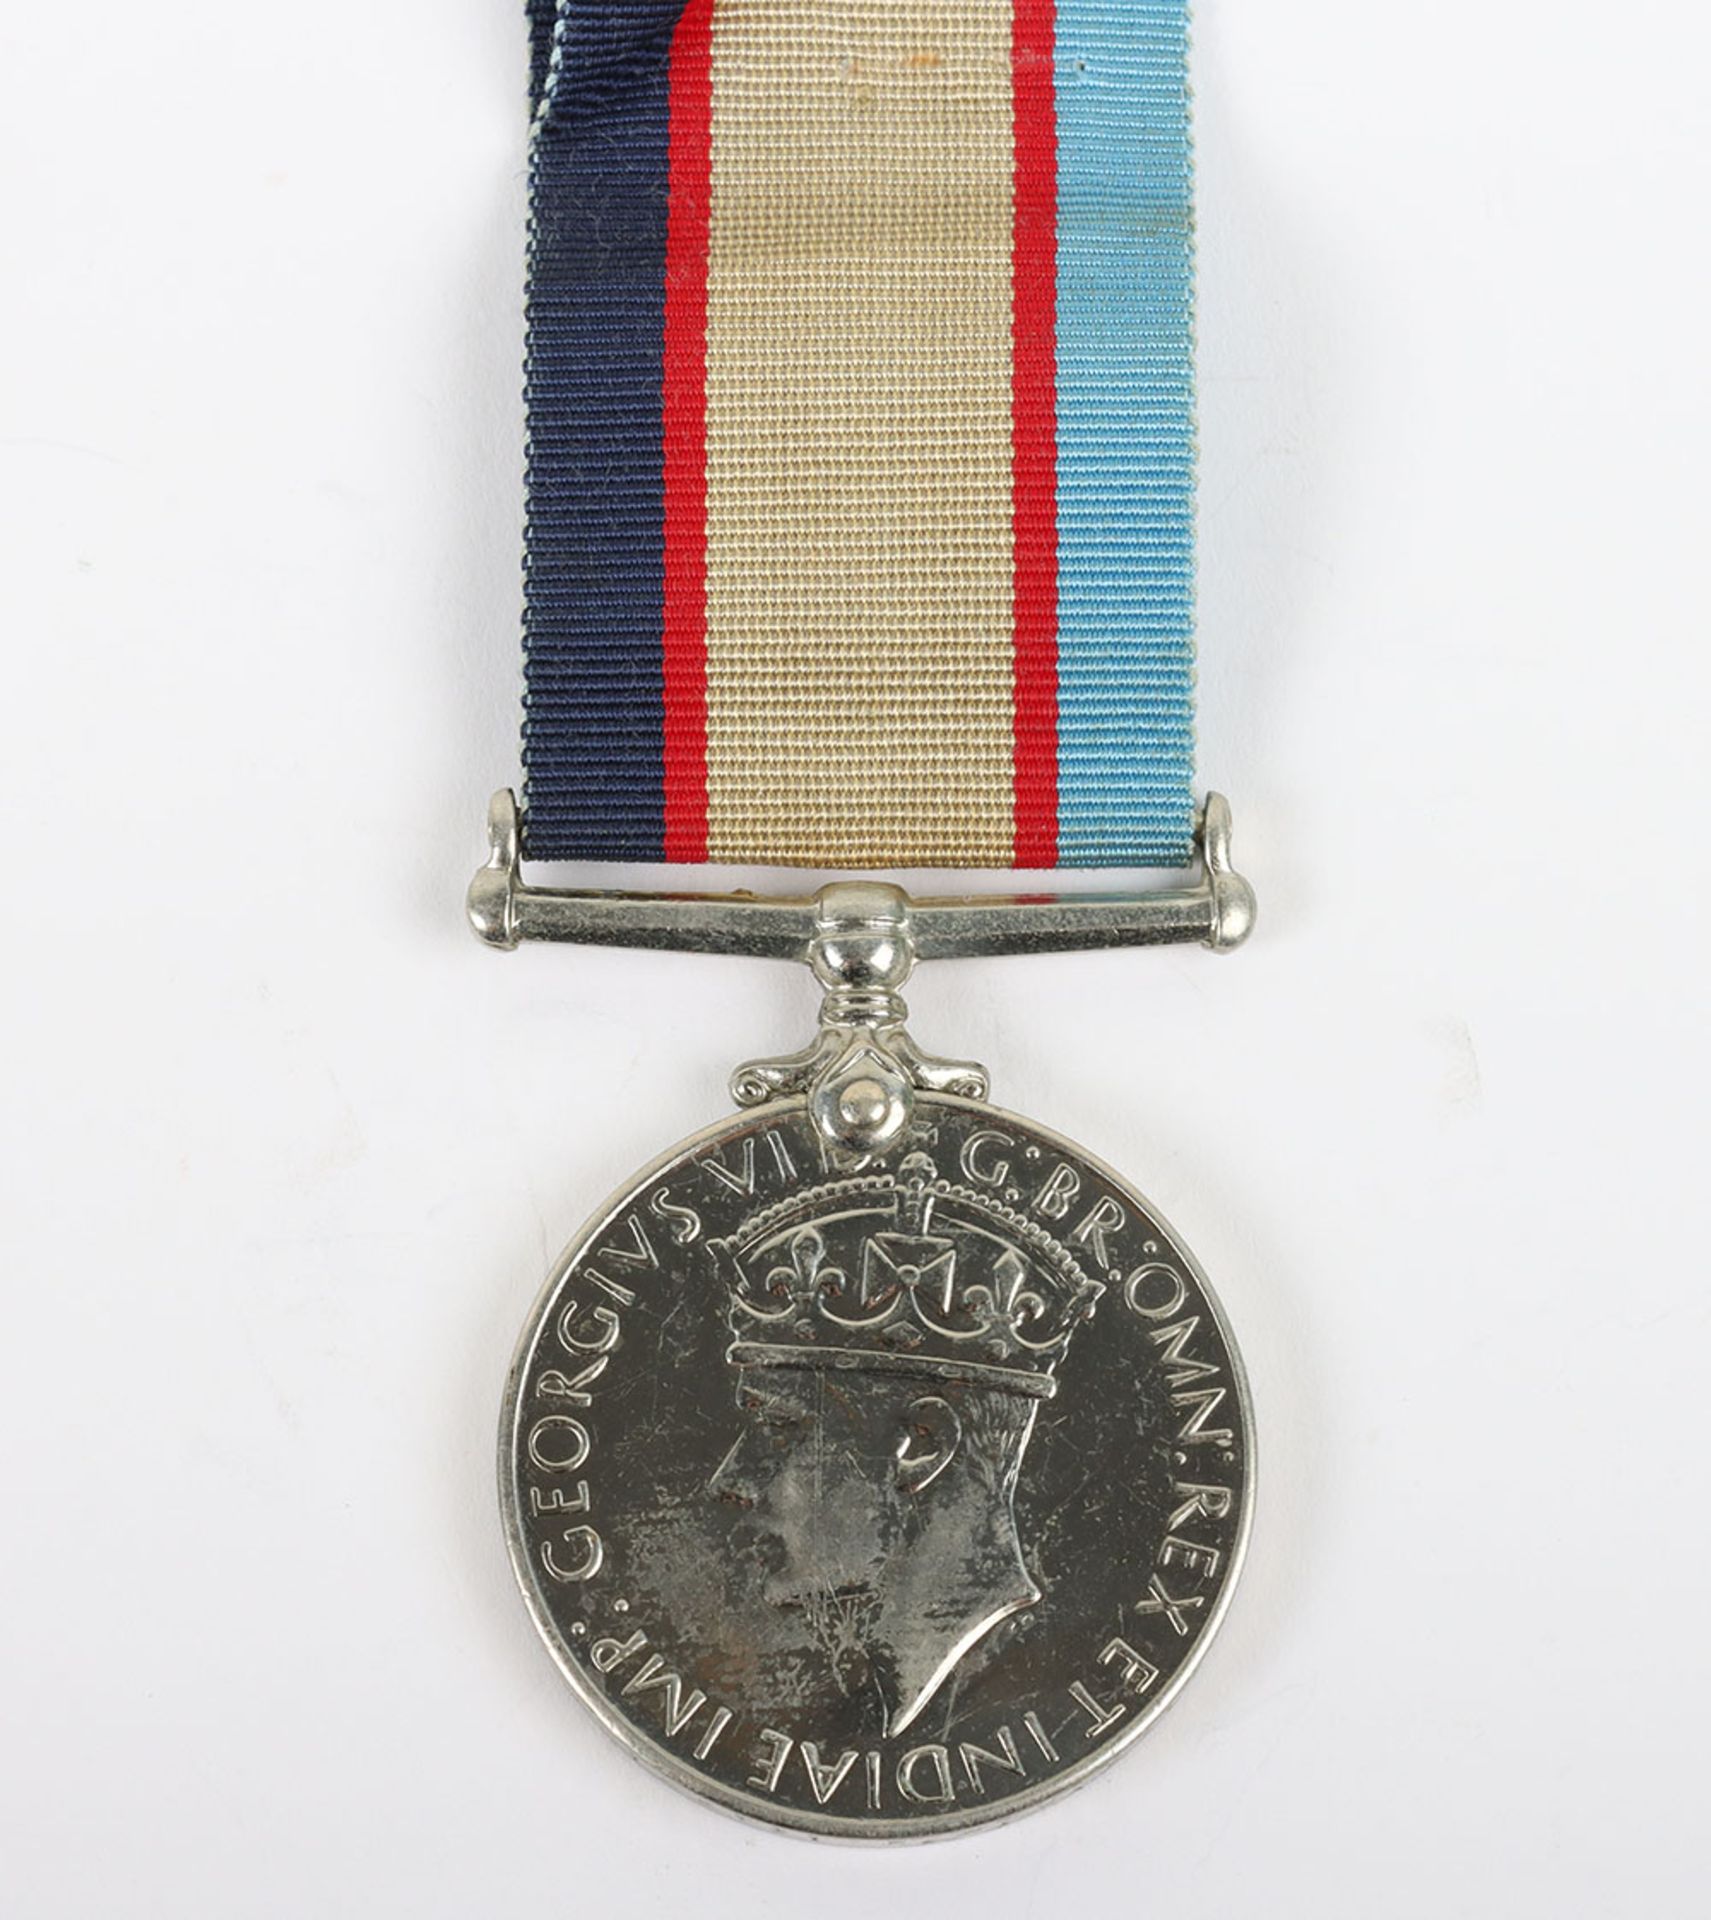 An interesting and scarce Second World War Australia Service medal to a Major General who was Direct